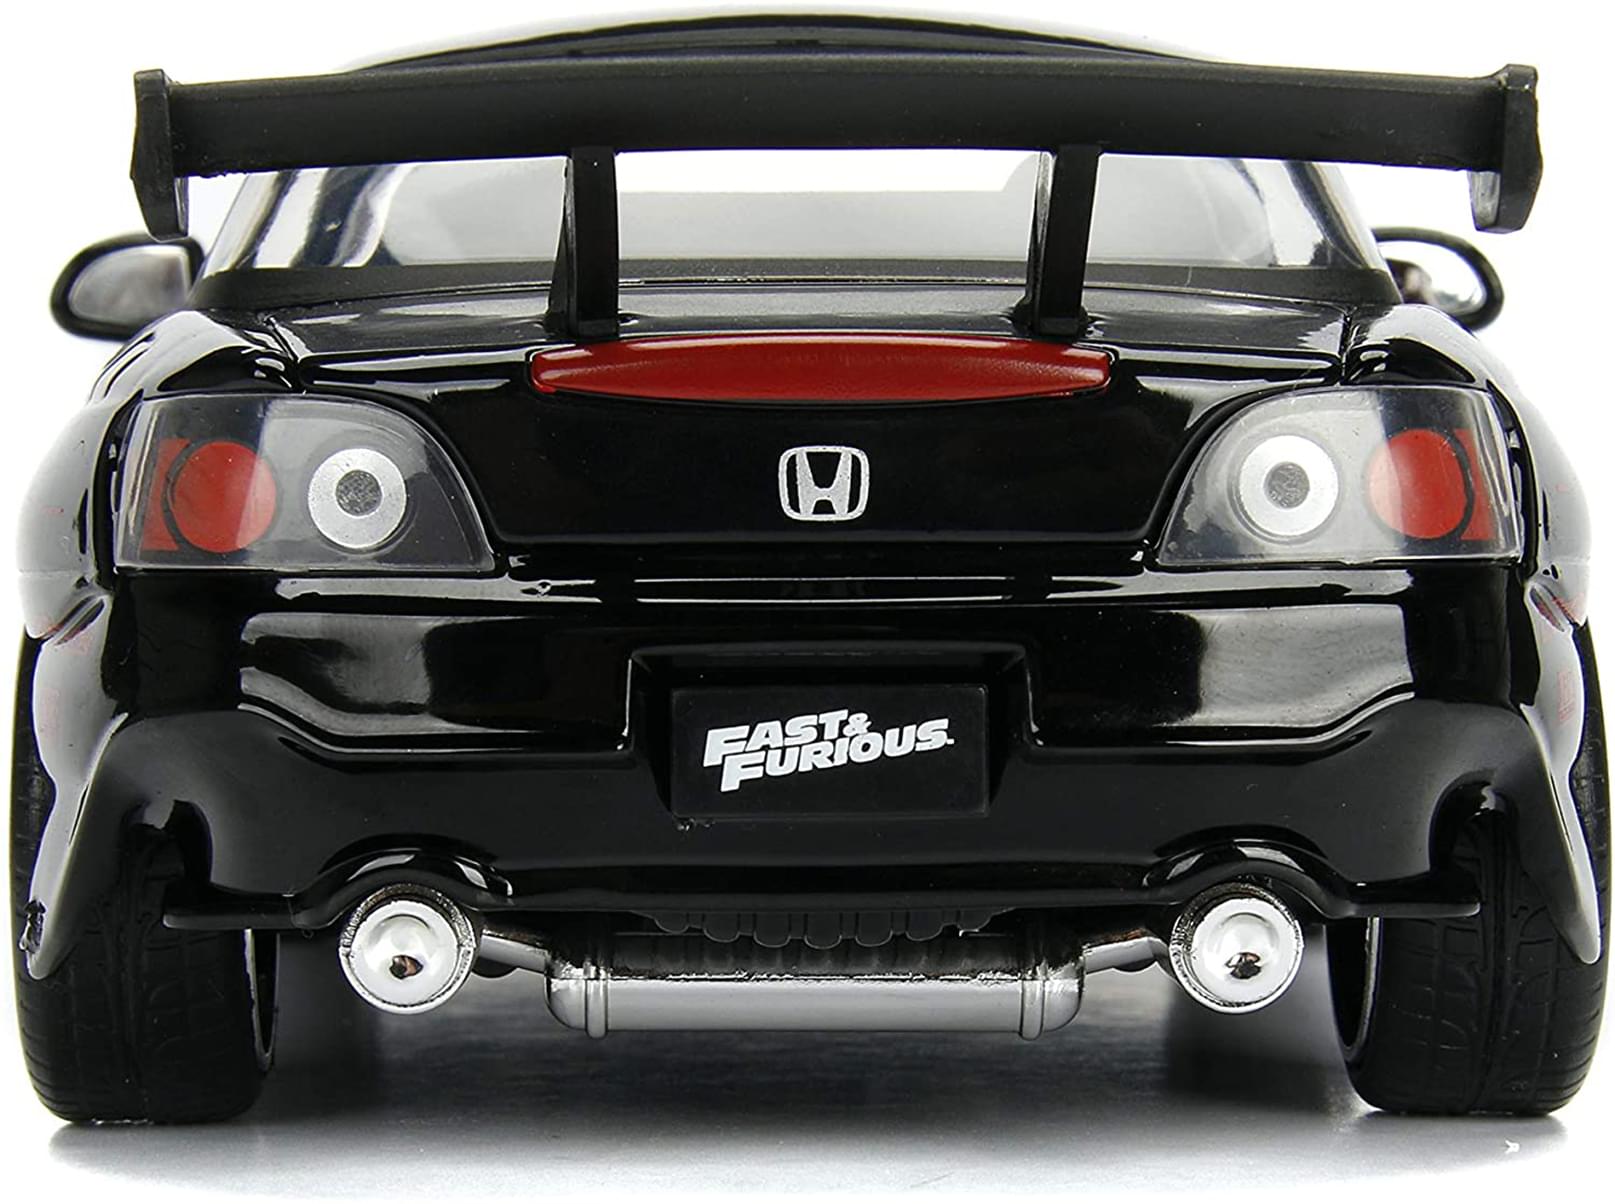 The Fast and the Furious Johnny's Honda S2000 1:24 Die Cast Vehicle